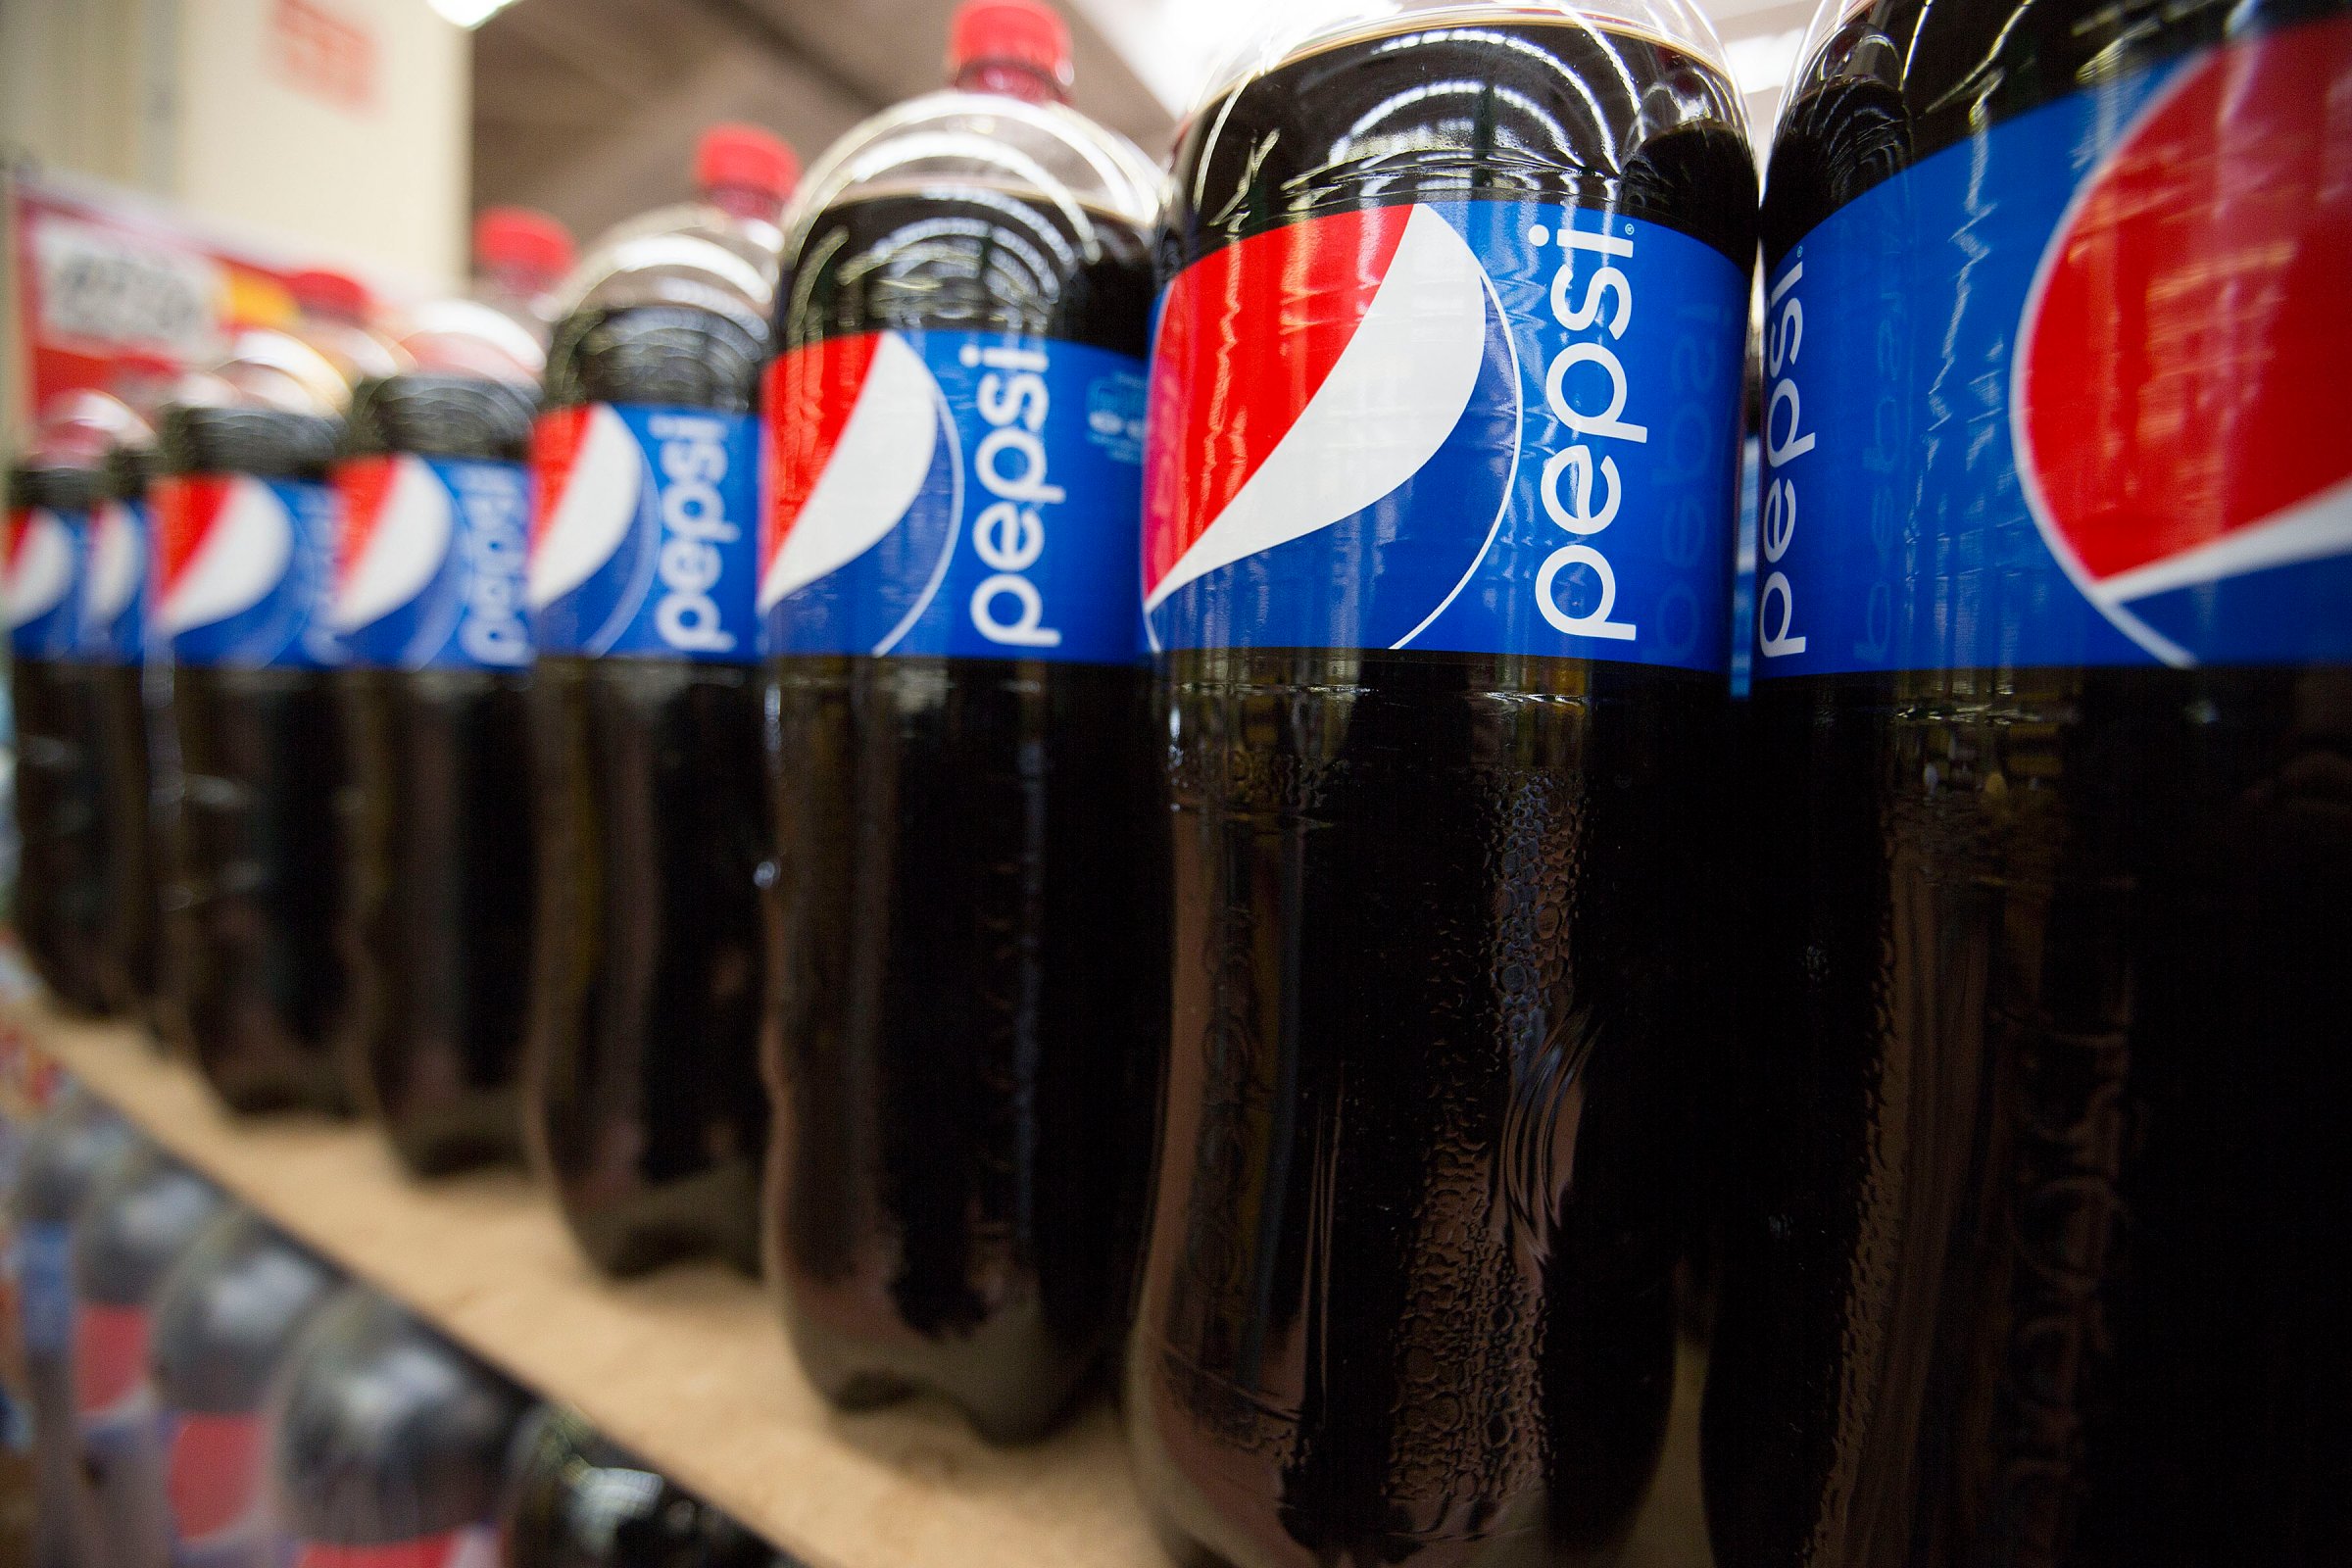 PepsiCo Products Ahead Of Earnings Data